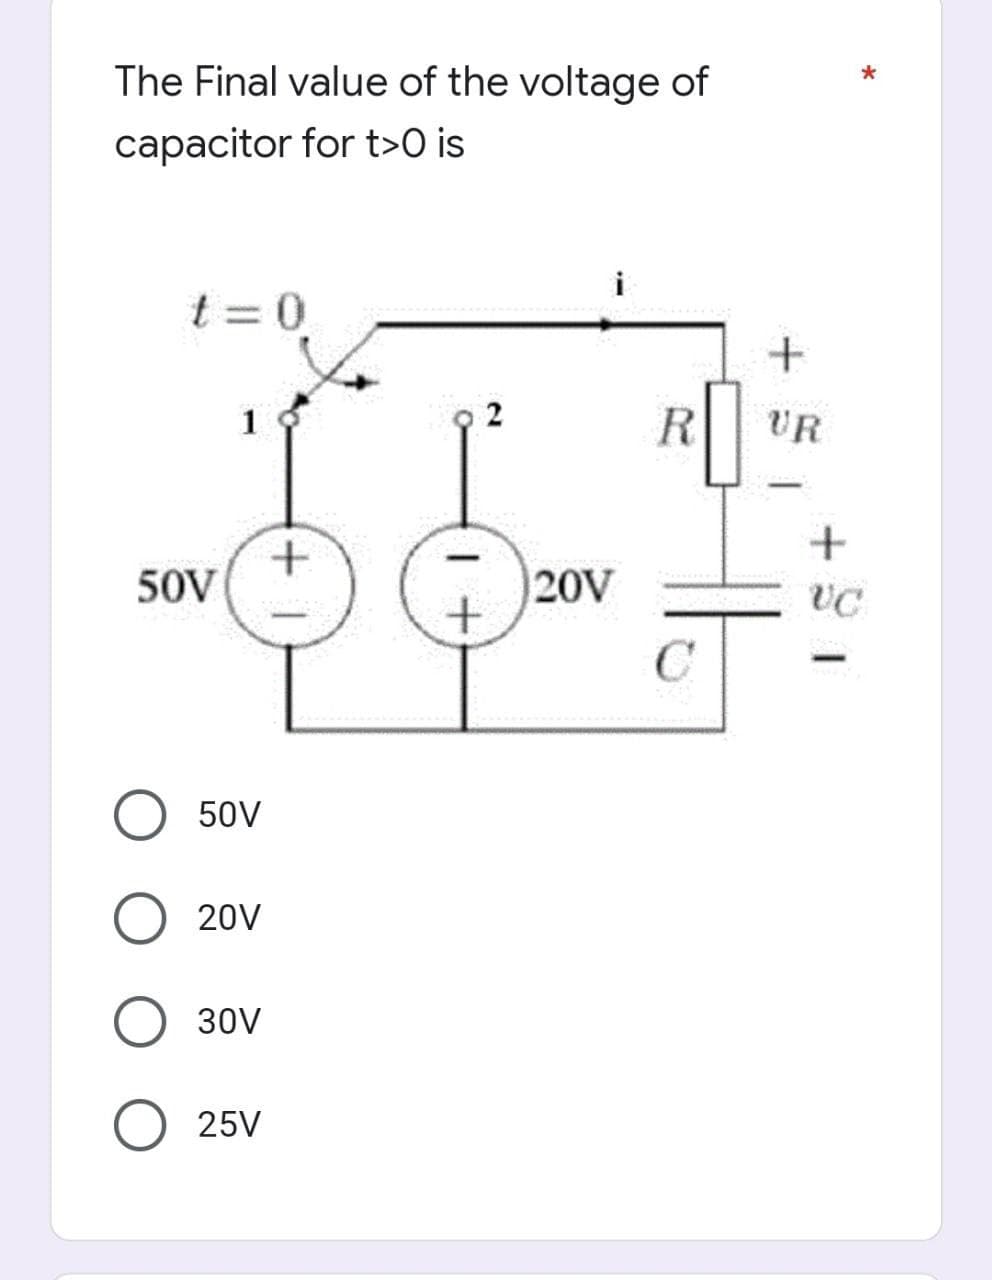 The Final value of the voltage of
capacitor for t>0 is
t=0
50V
1
50V
O 20V
30V
O 25V
+
19 2
20V
R
C
+
UR
+
VC